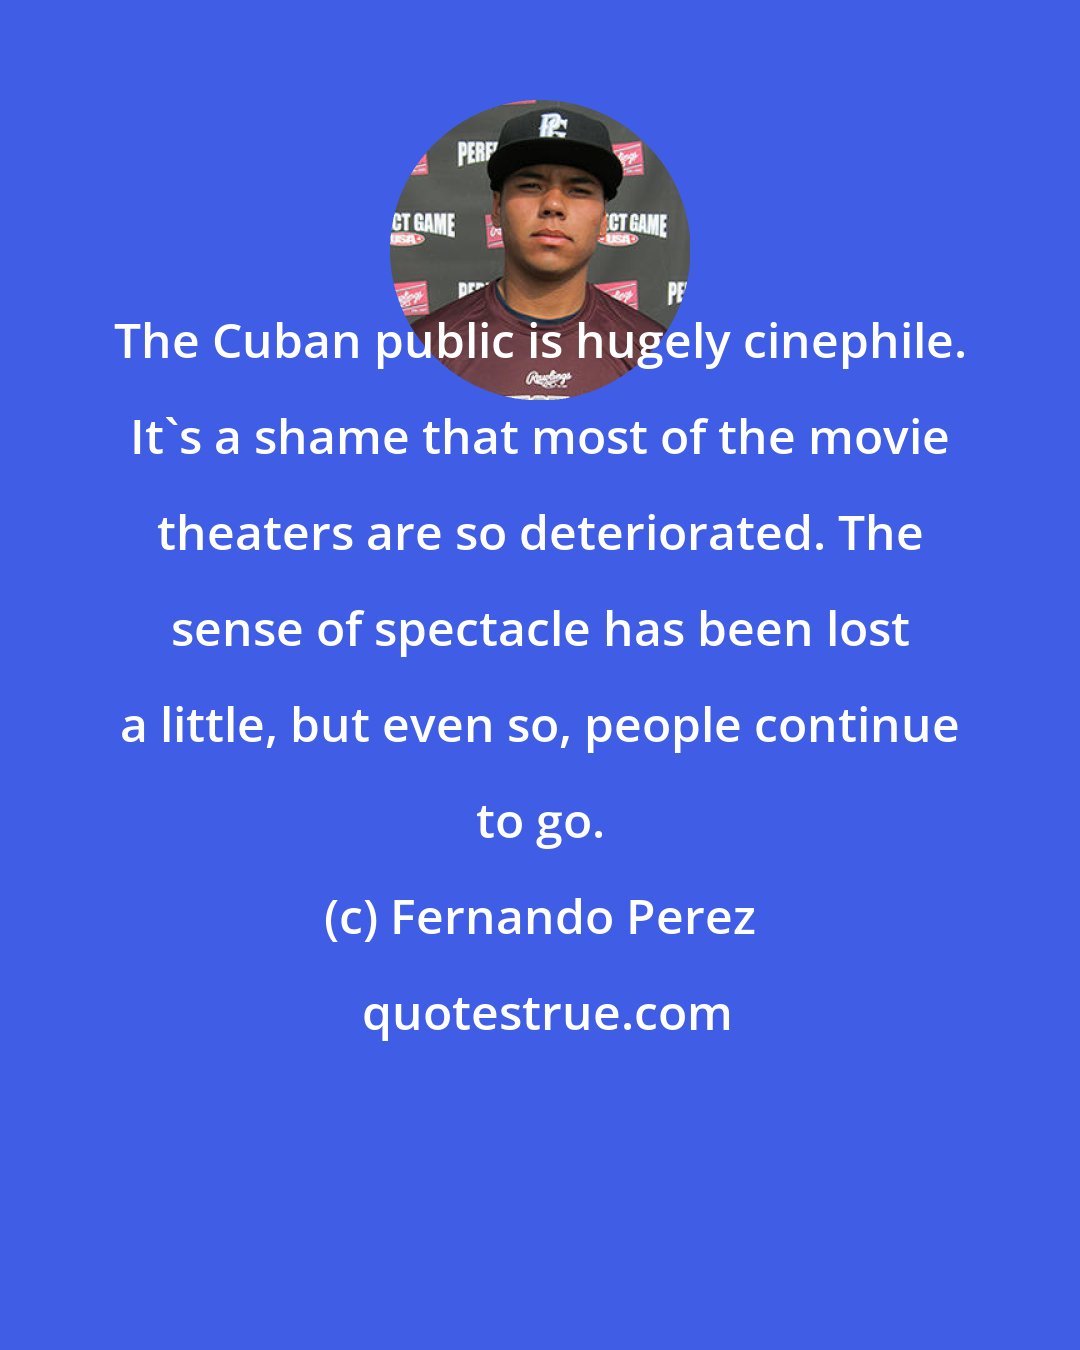 Fernando Perez: The Cuban public is hugely cinephile. It's a shame that most of the movie theaters are so deteriorated. The sense of spectacle has been lost a little, but even so, people continue to go.